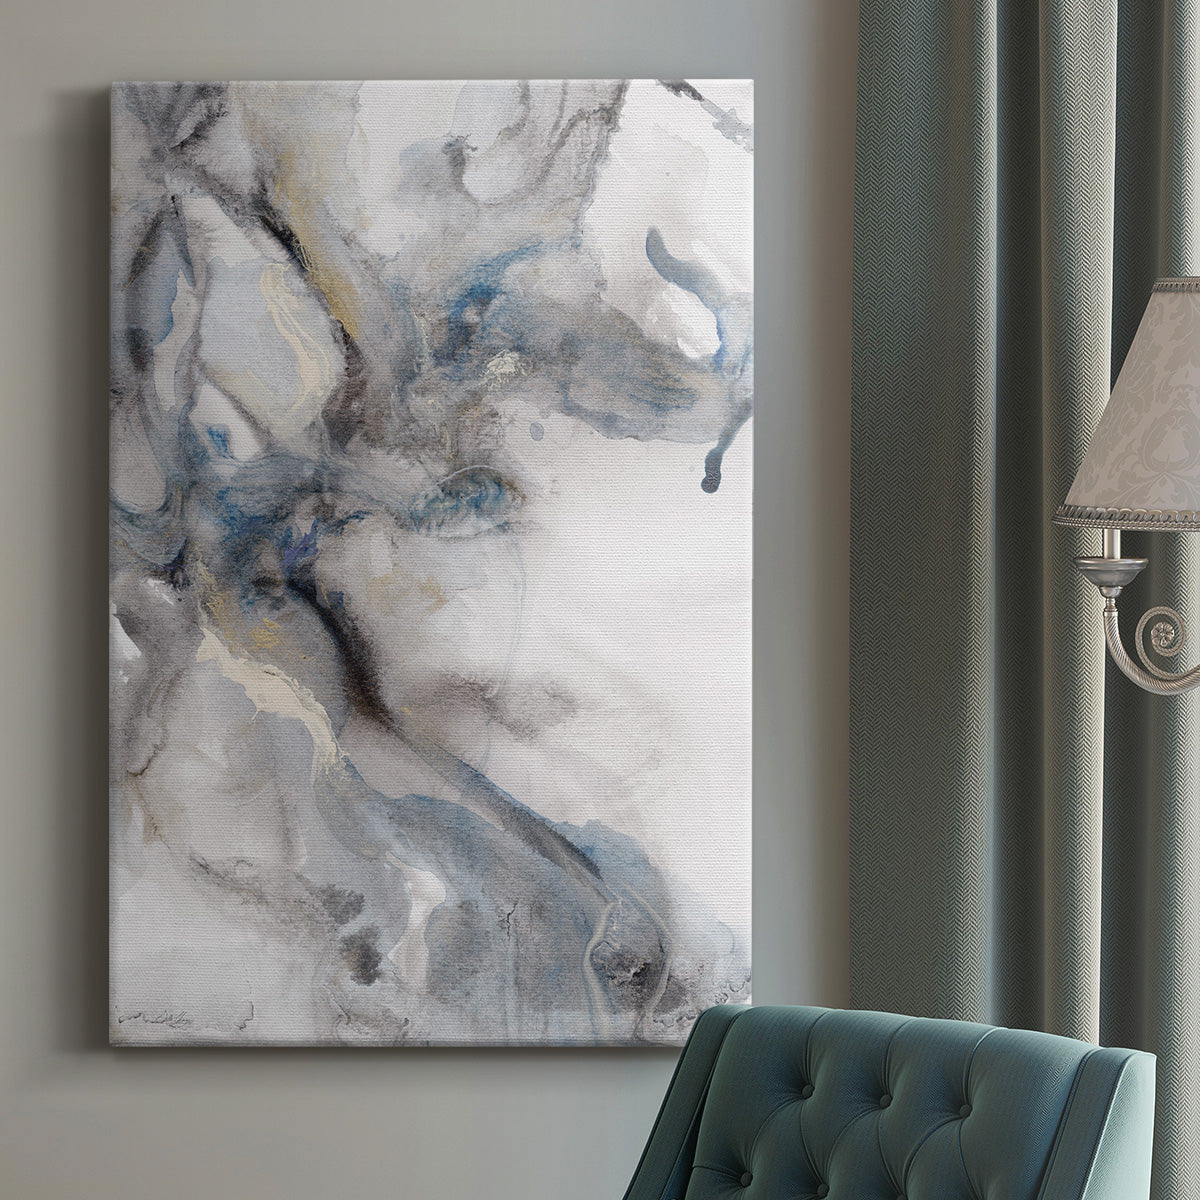 Marble Trance Premium Gallery Wrapped Canvas - Ready to Hang